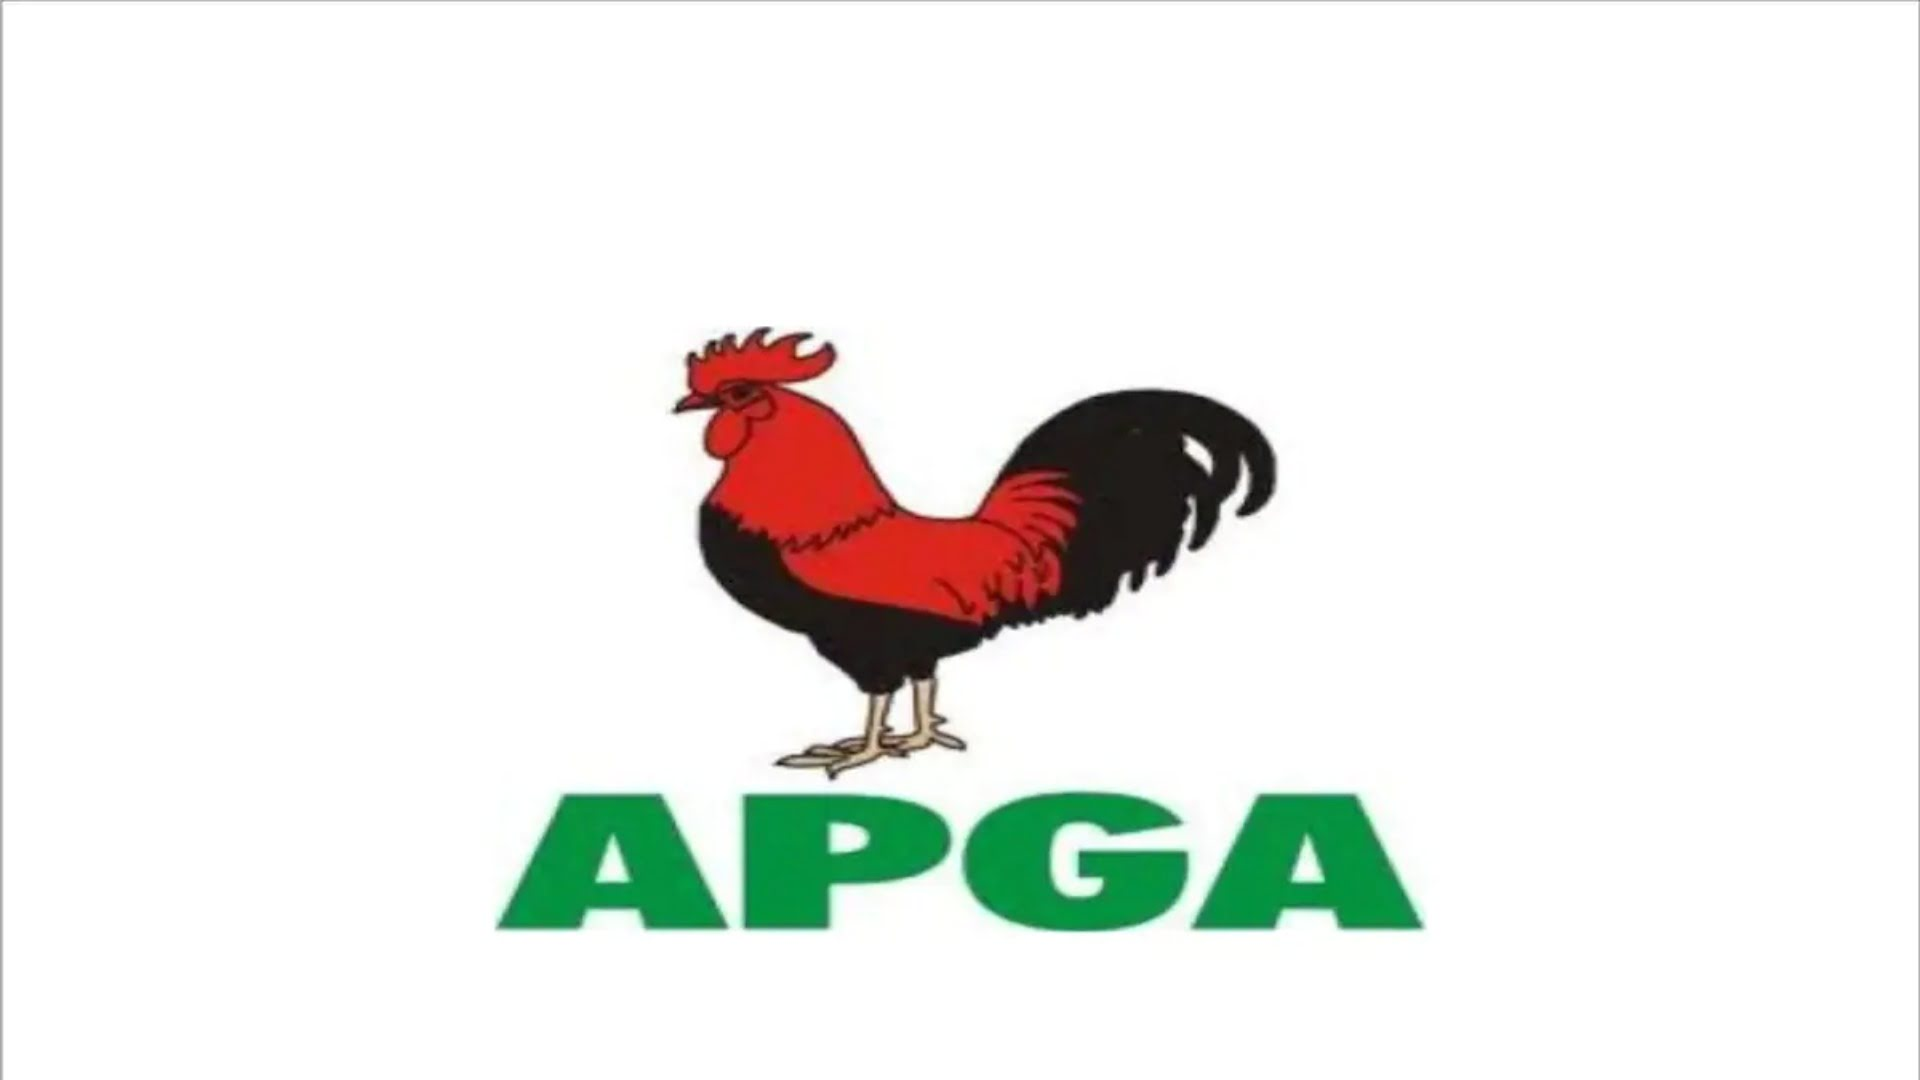 Ebonyi bye-election: APGA express concern in plans to harm and threaten Eleje, its senatorial candidate